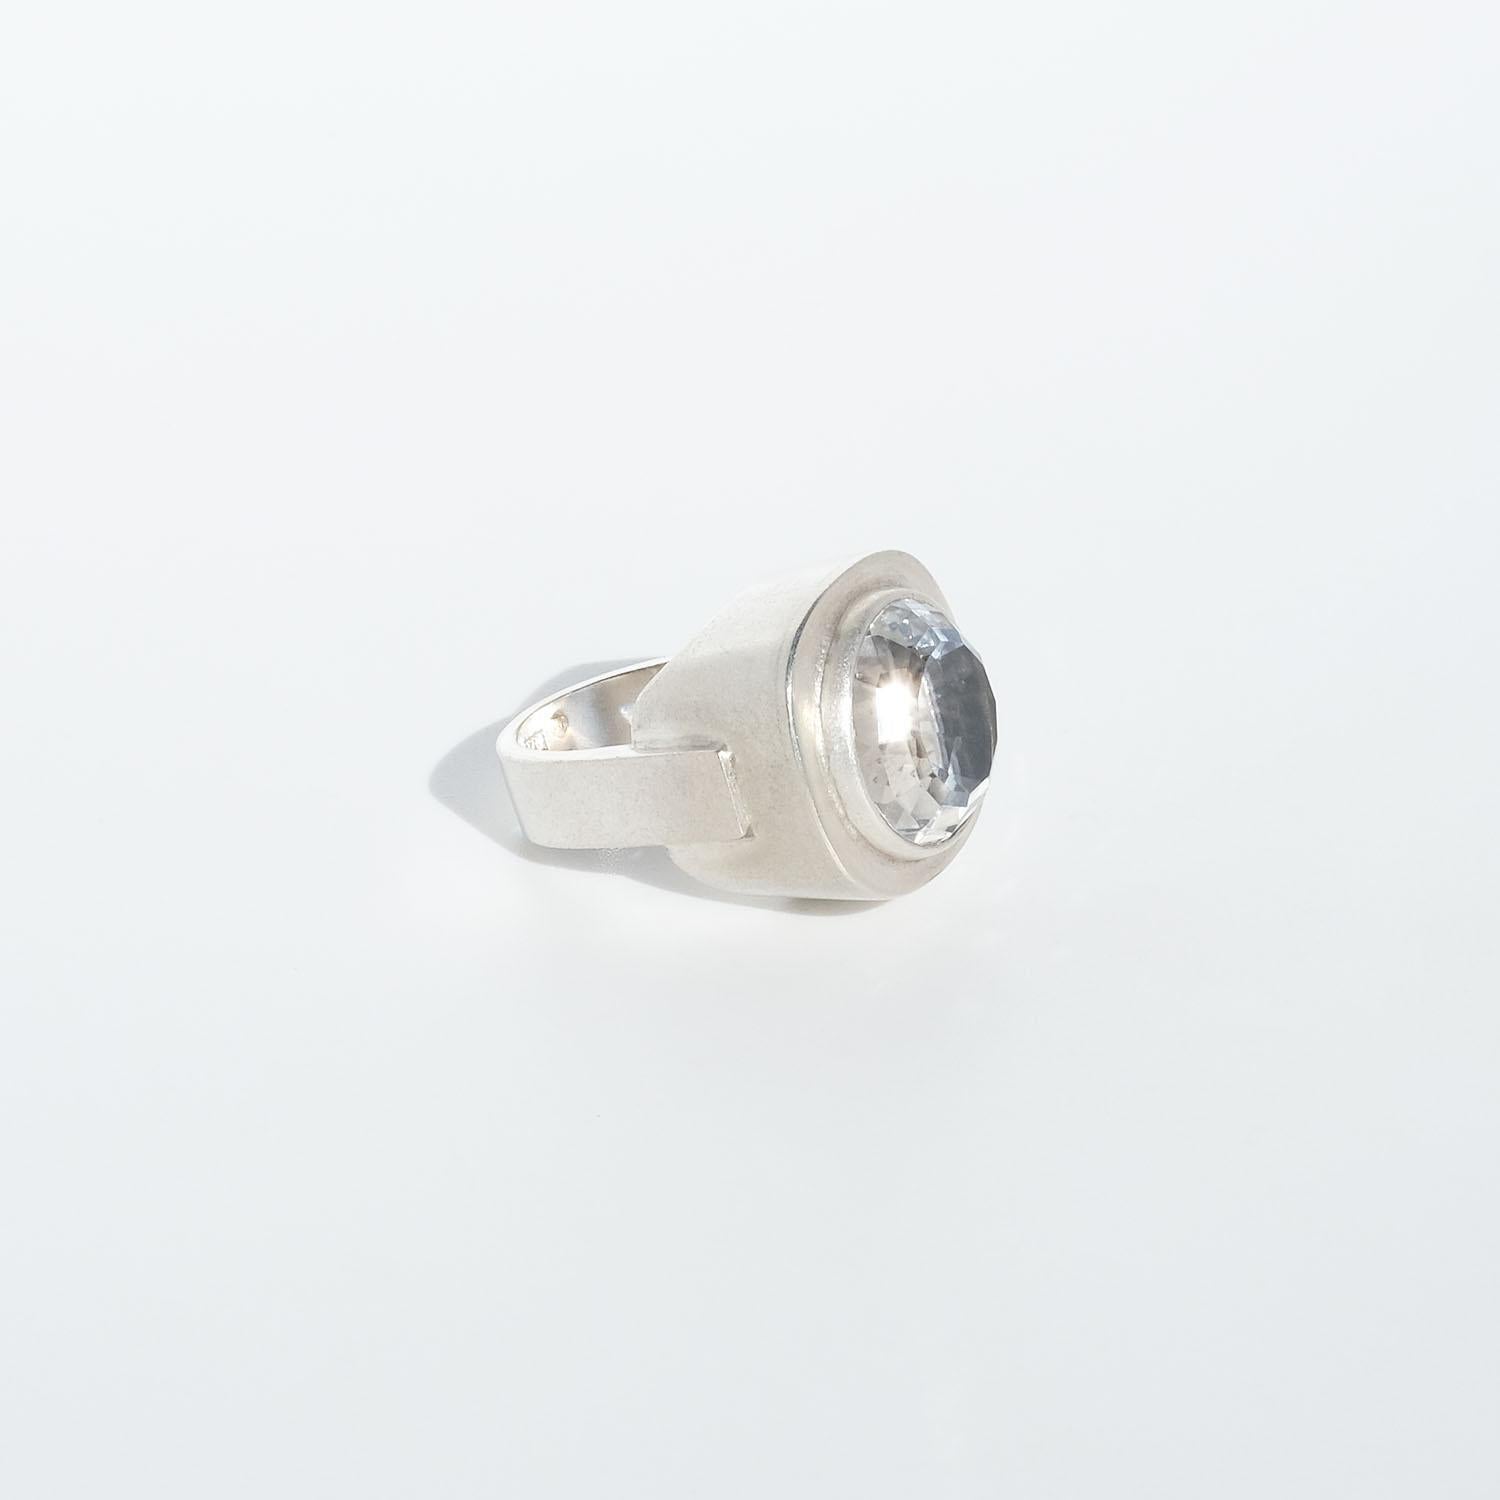 This powerful sterling silver ring is adorned with a faceted rock crystal. The setting is shaped like a silver bowl from which the rock crystal arises. The shank is u-shaped and attached on the setting’s outer sides.

The ring has a roman style to